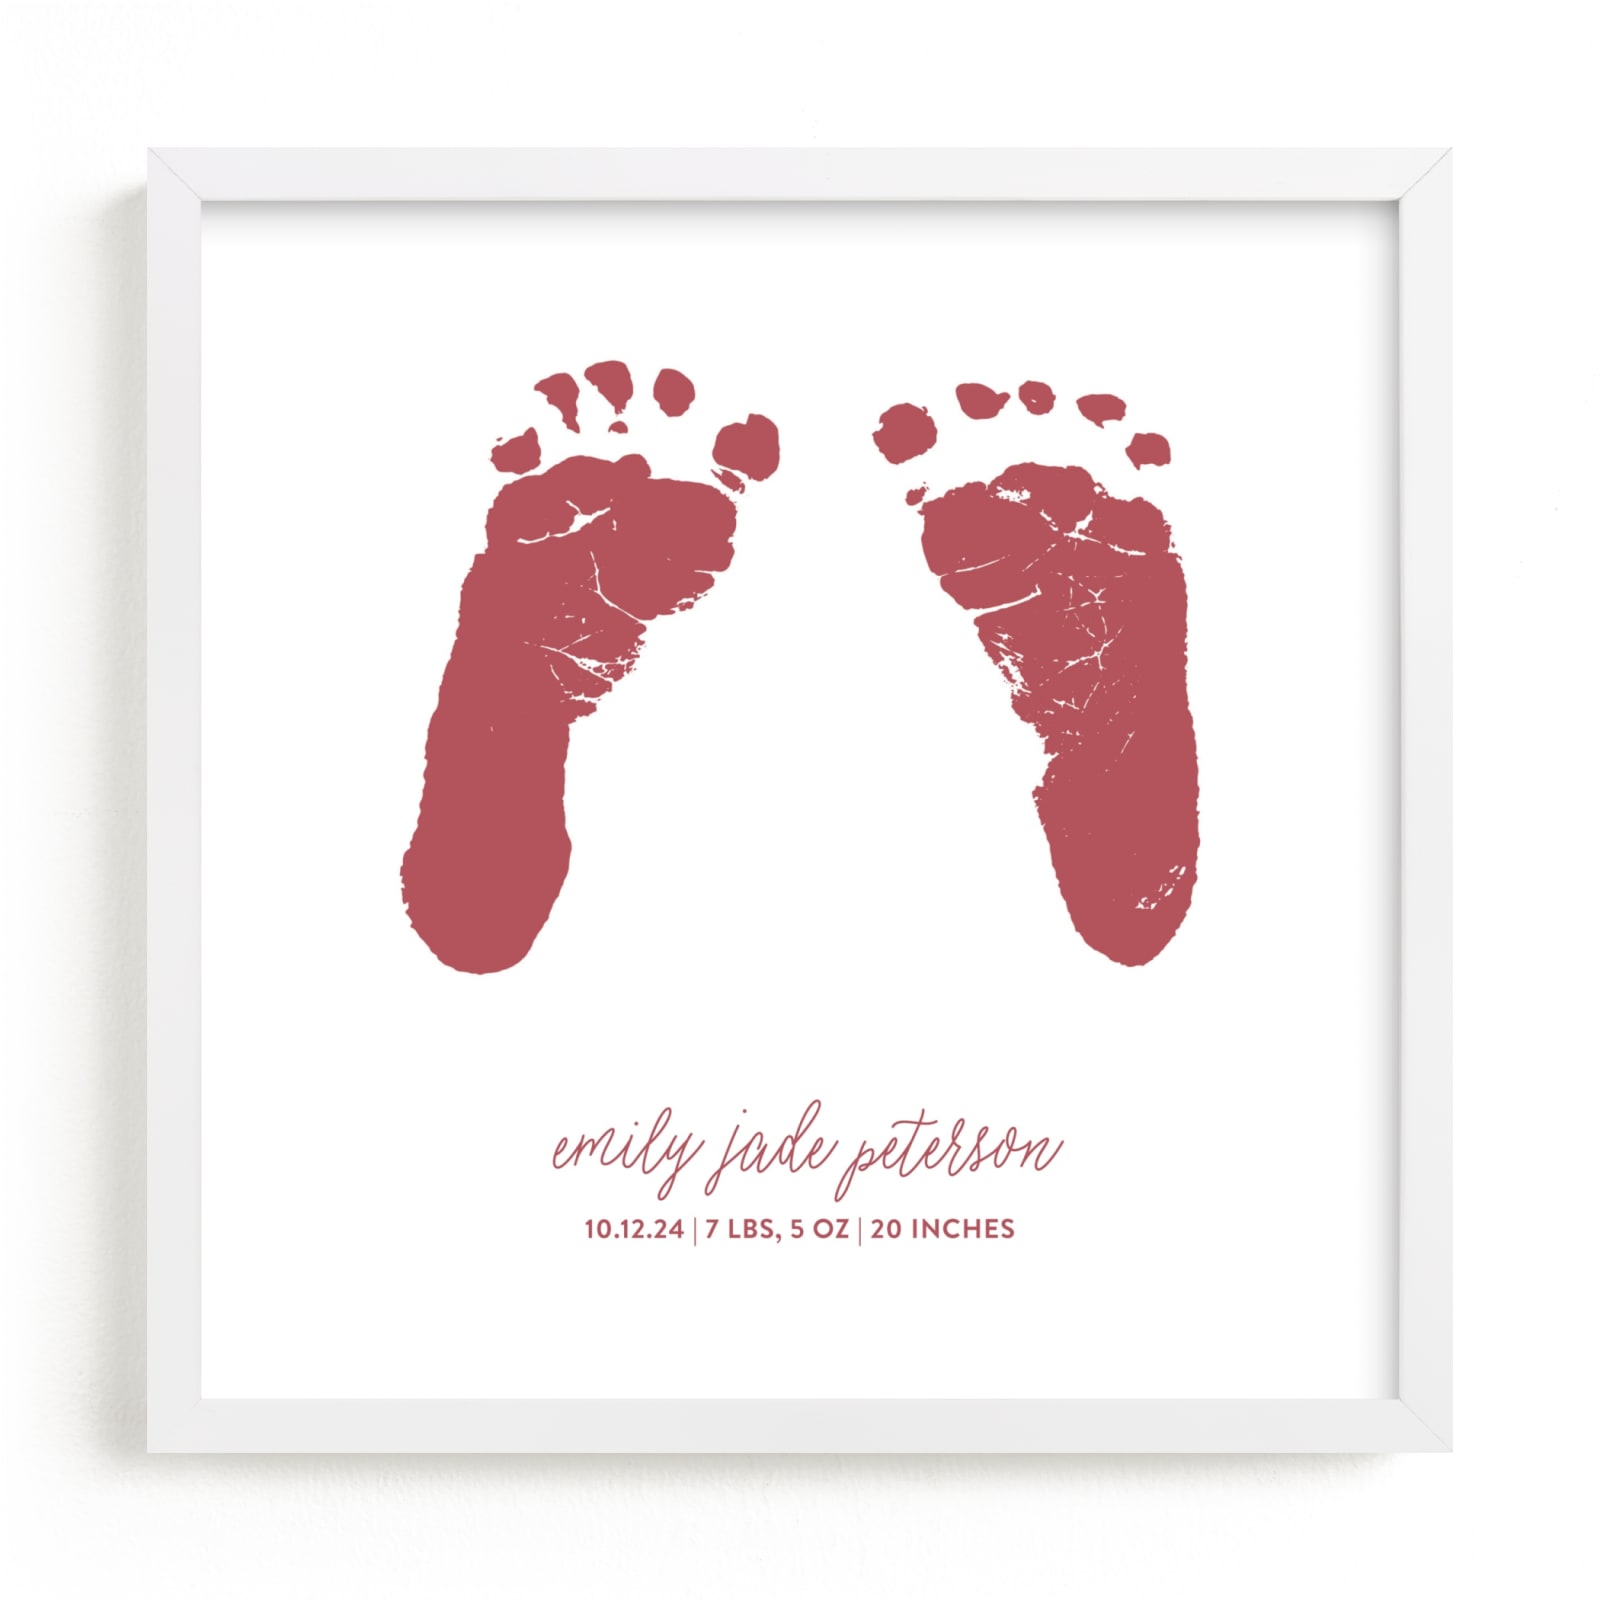 This is a red photos to art by Minted called Custom Footprints Letterpress Art.